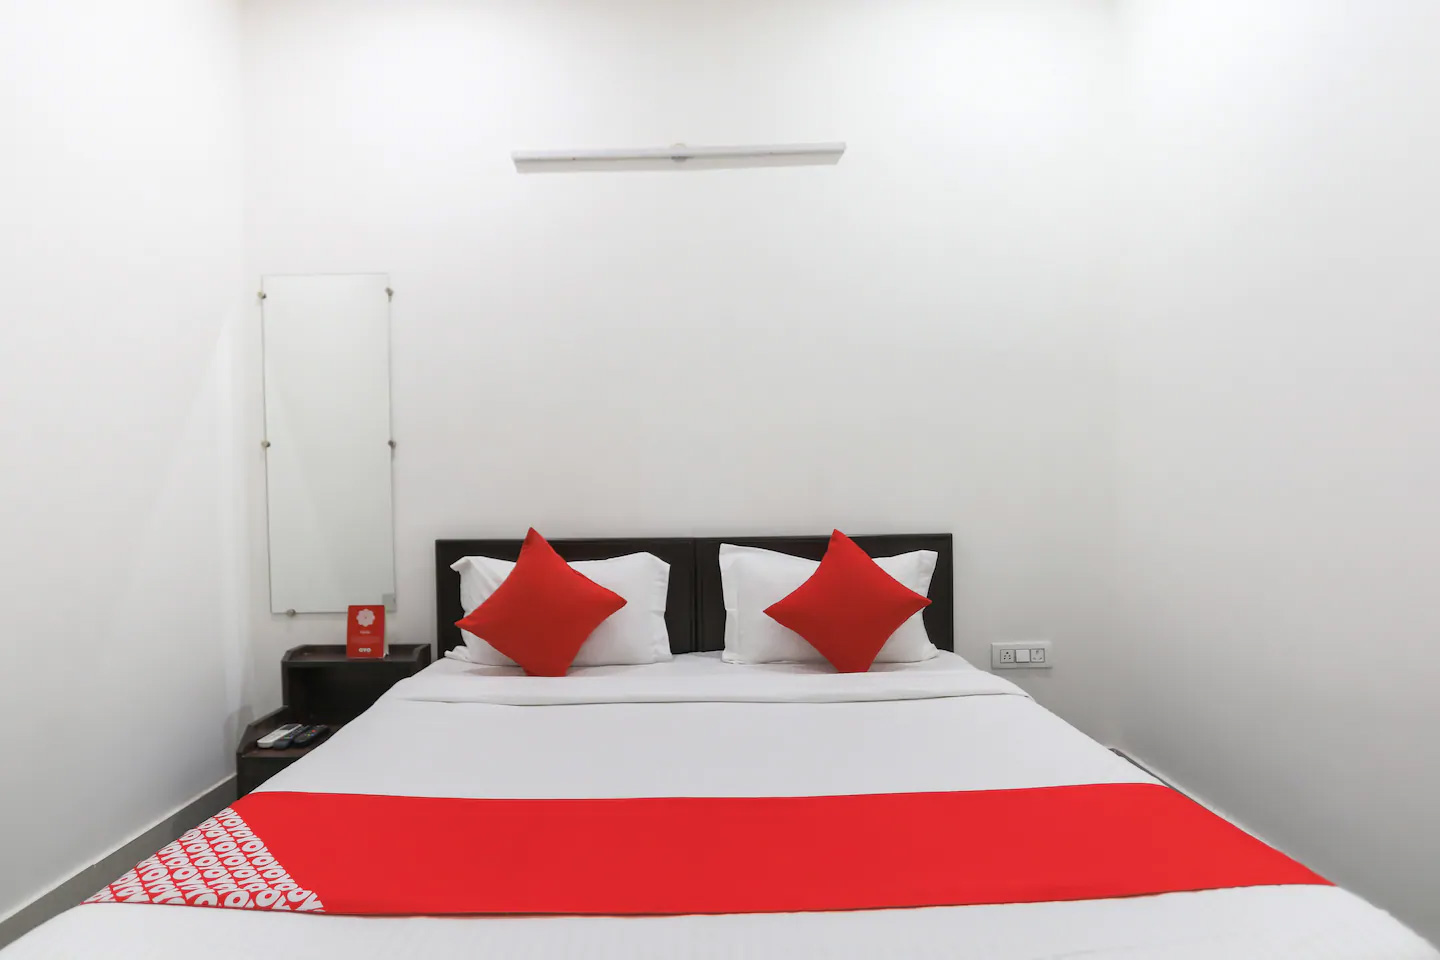 Guest house in Gurgaon, guest house near medanta medicity, Budget guest house in Gurgaon Delhi NCR, cheap guest house in Gurgaon